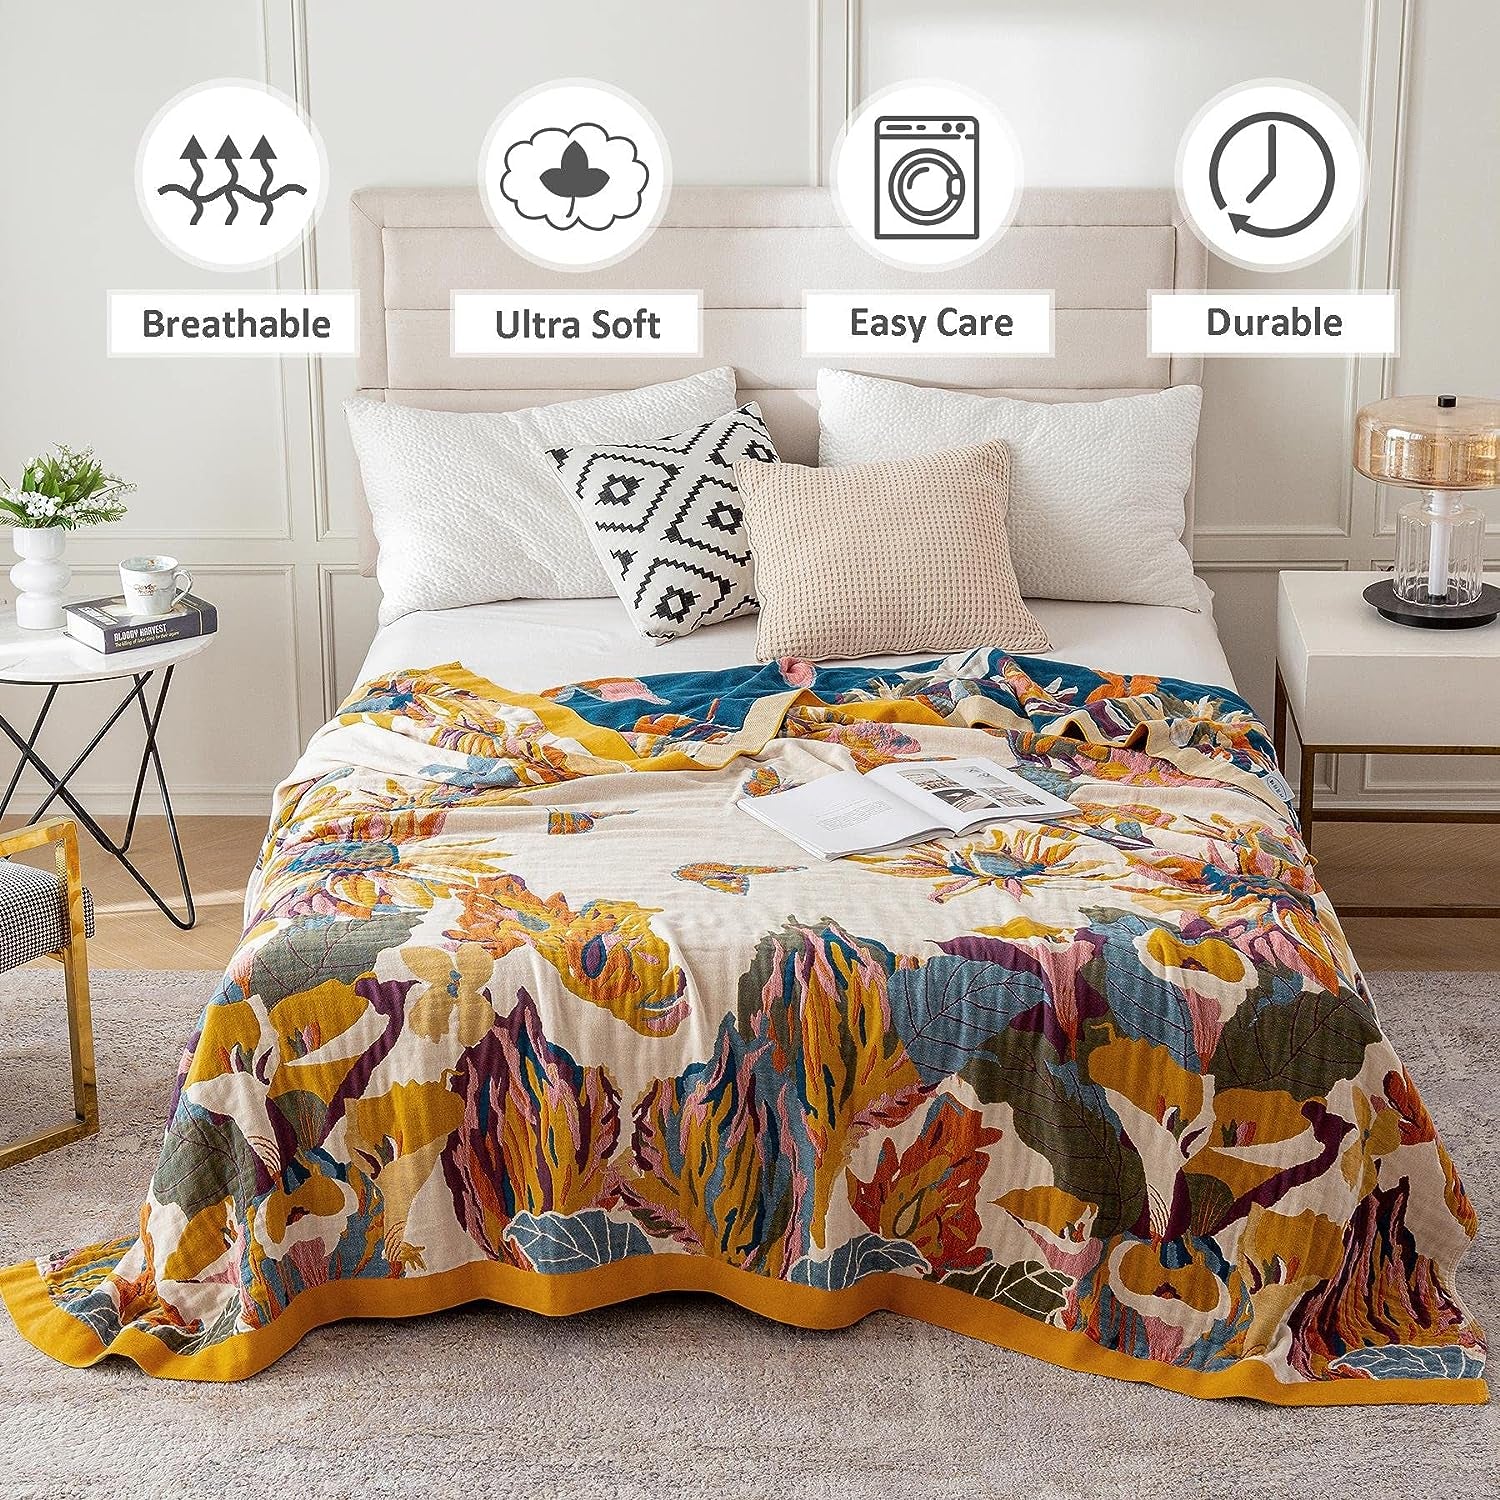 Boho Throw Blanket - 100% Cotton Ultra Soft Bed Throw- Floral Bird and Butterfly Farmhouse Decor Bed Blankets,60"×80" All Season Blanket for Sofa Couch Chair